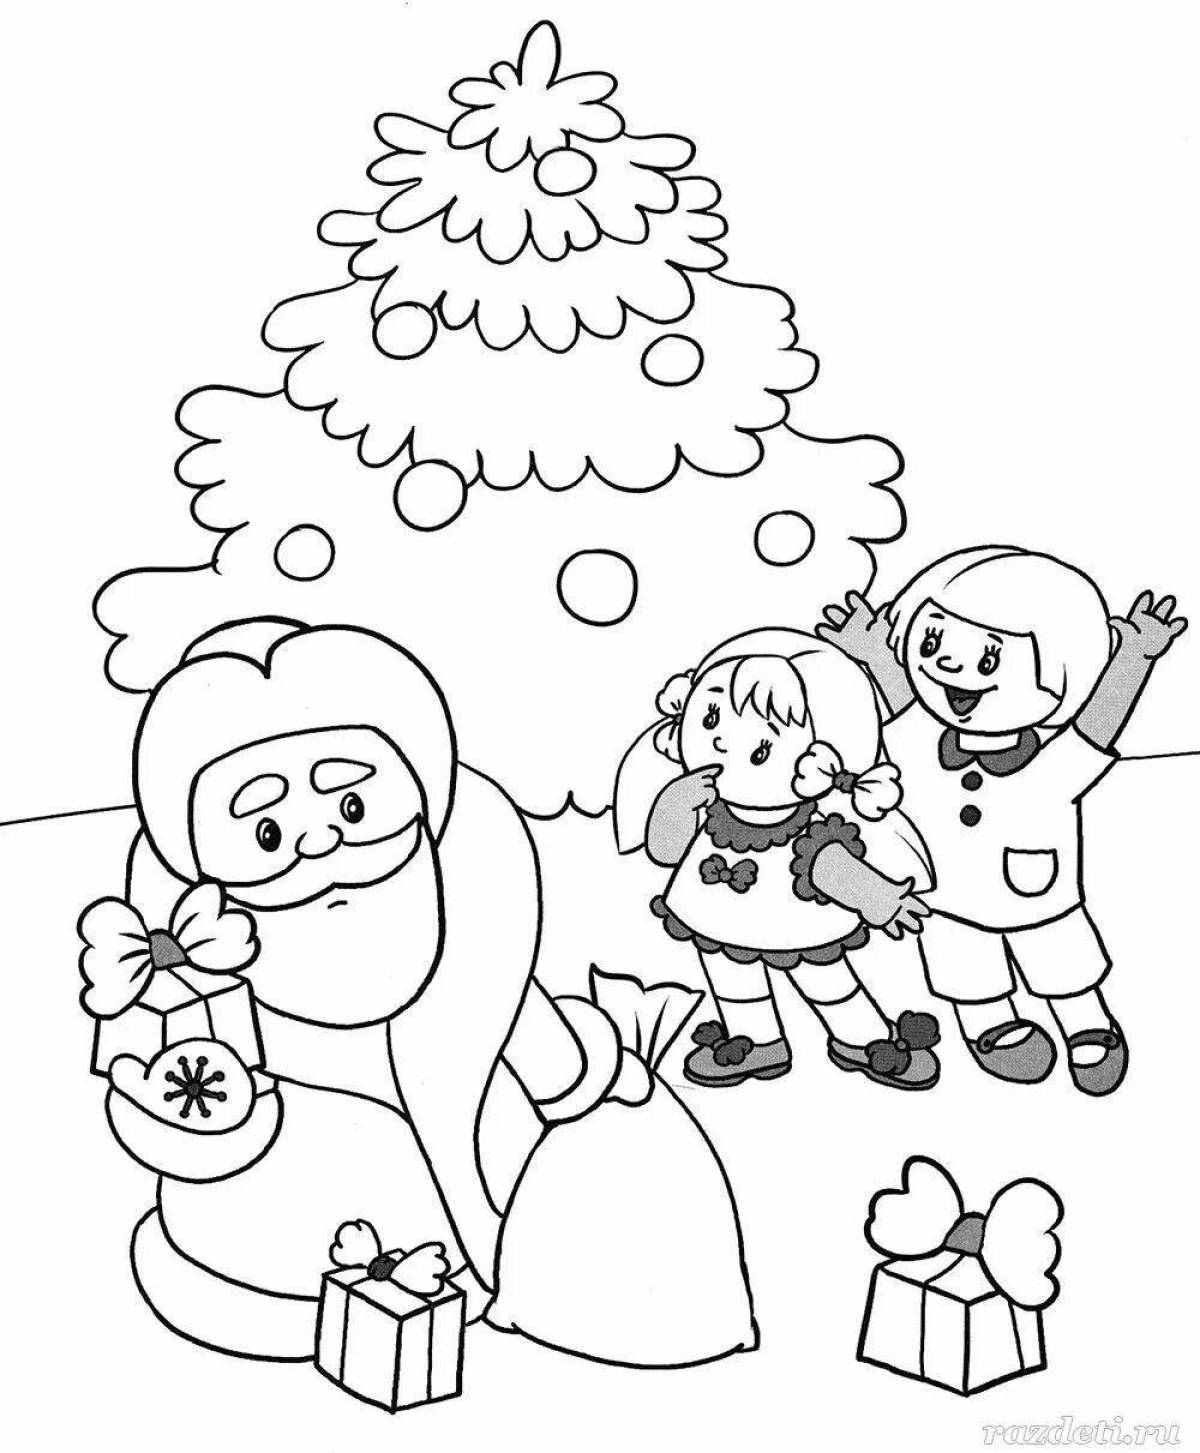 Live winter coloring book for kids